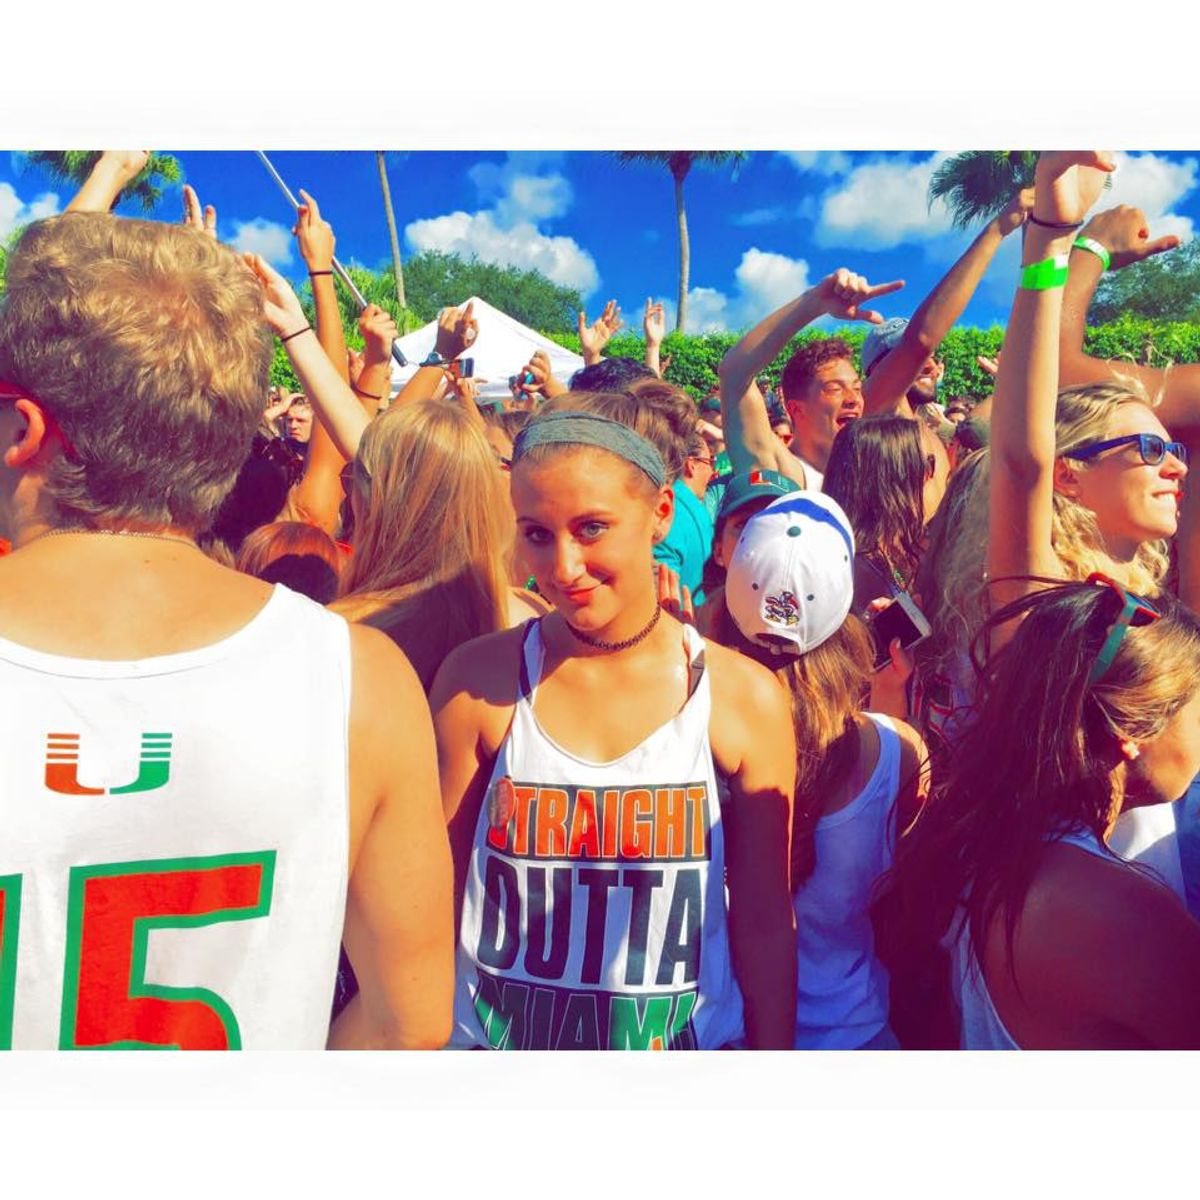 How To Survive The University Of Miami